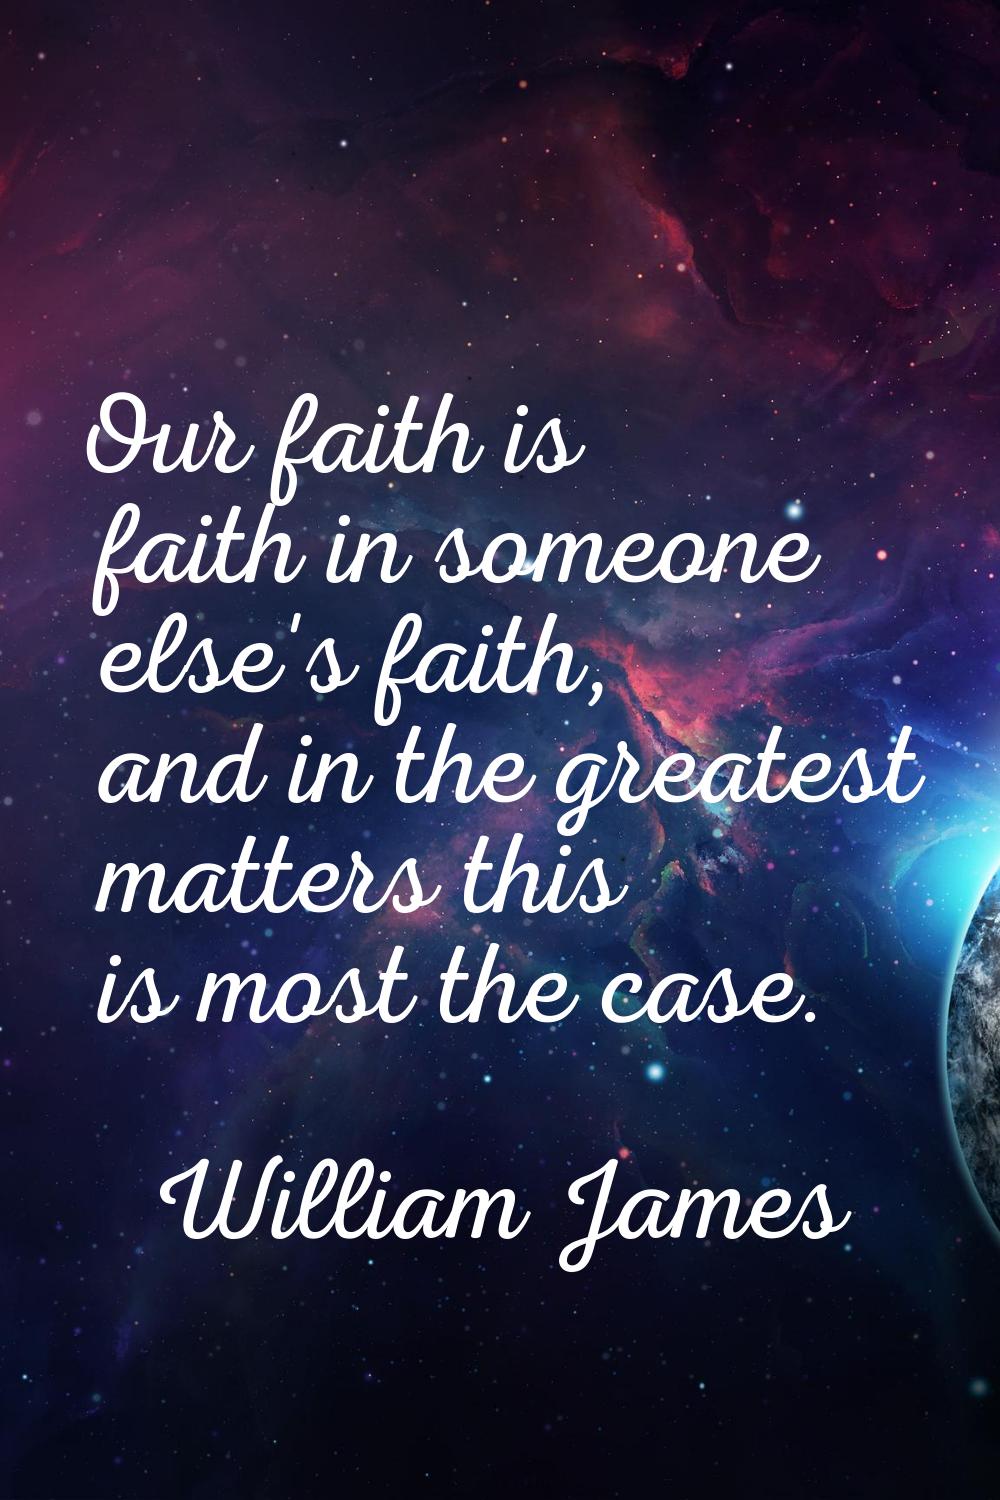 Our faith is faith in someone else's faith, and in the greatest matters this is most the case.